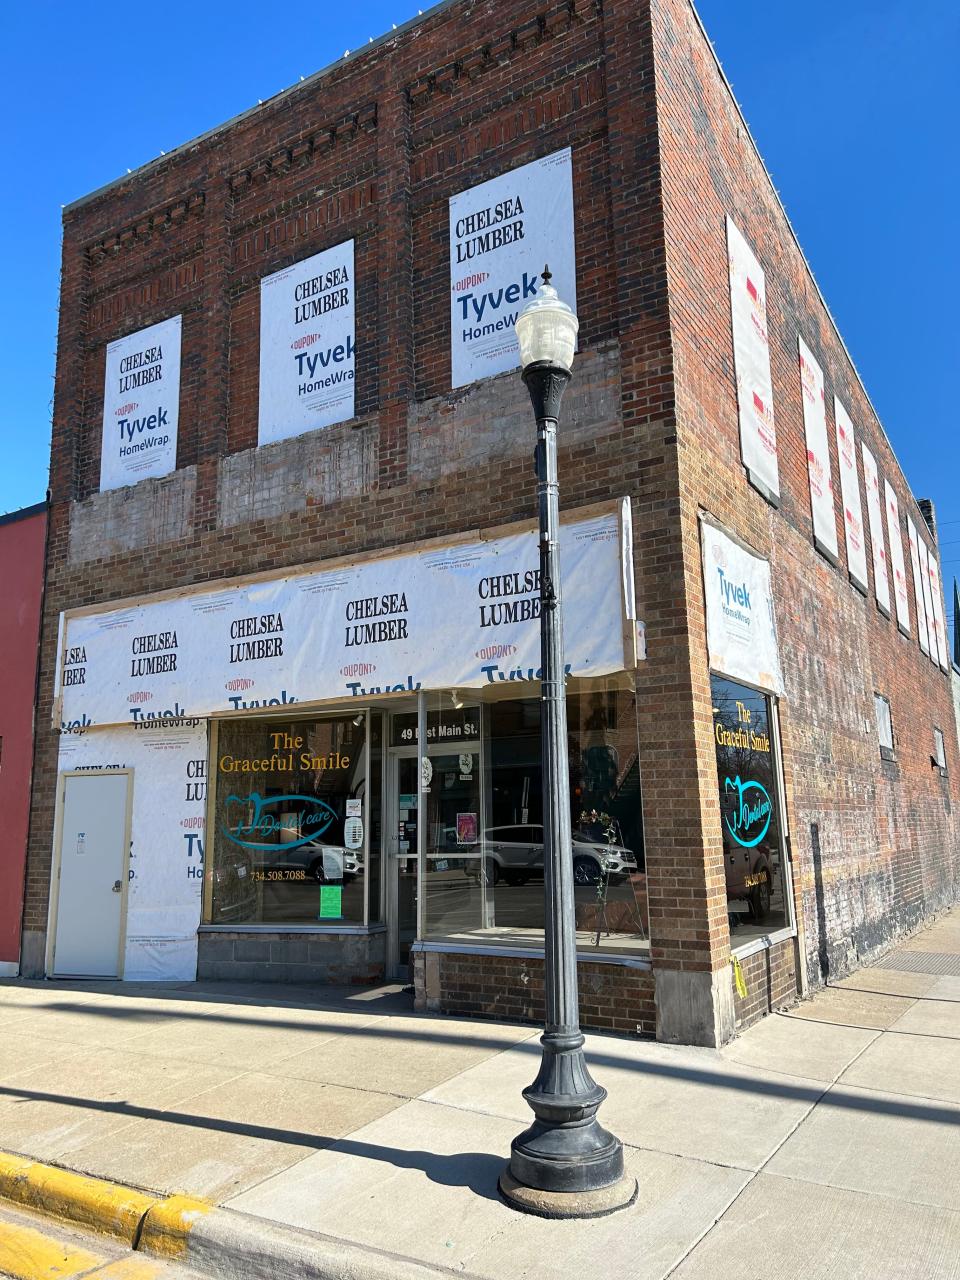 State funding is supporting work at 49 E. Main St. that will restore the historic facade of the building, make interior improvements and create two new residential units.